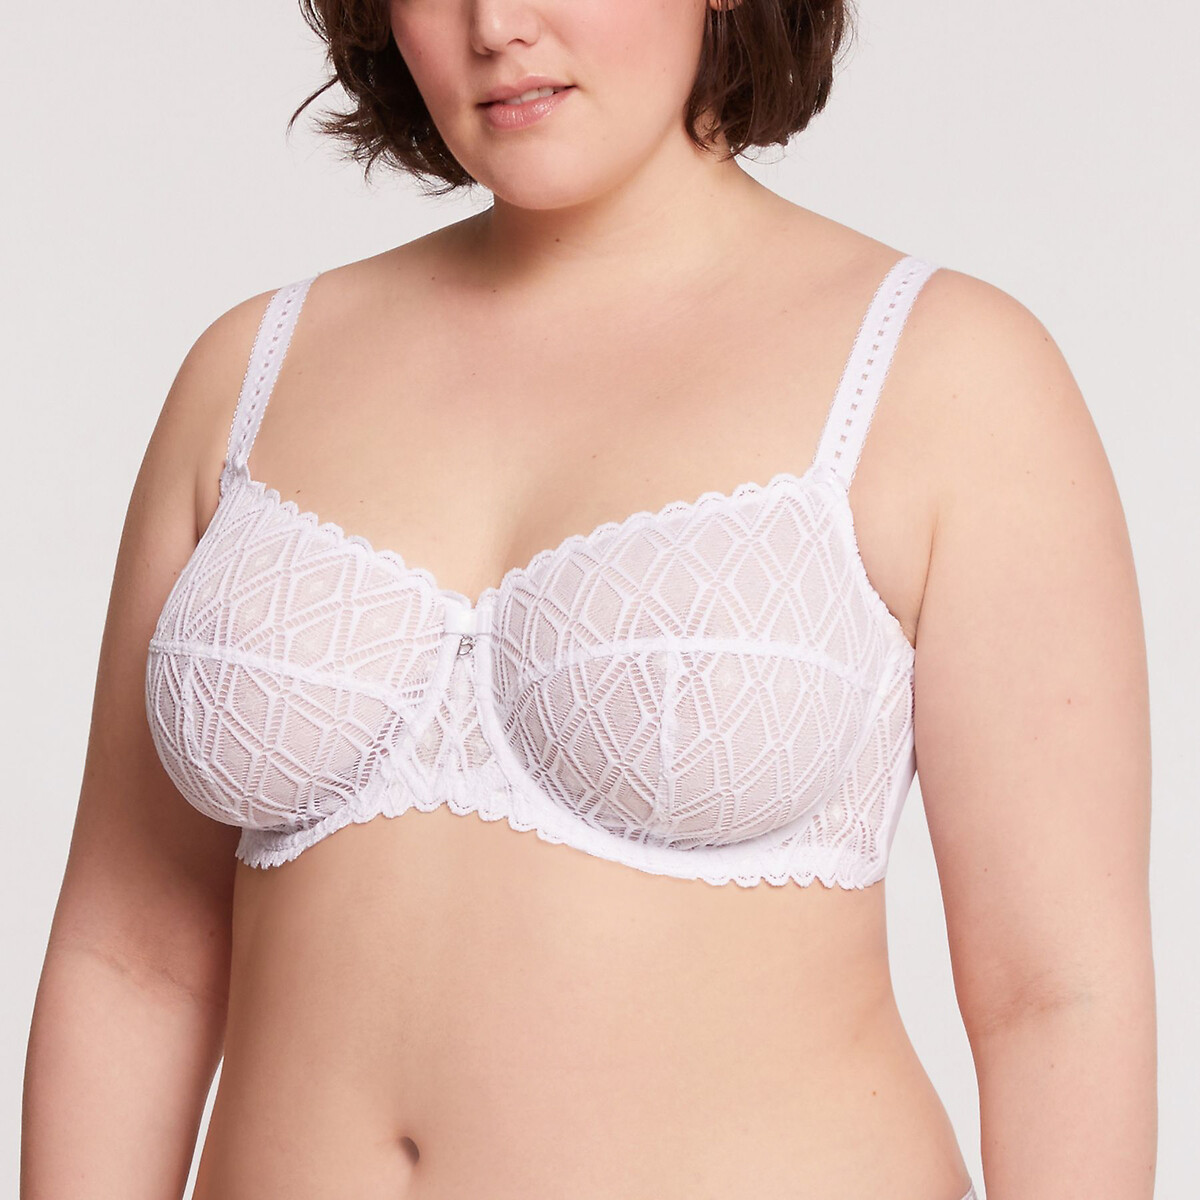 Buy A-E White Recycled Lace Full Cup Comfort Bra 34A, Bras